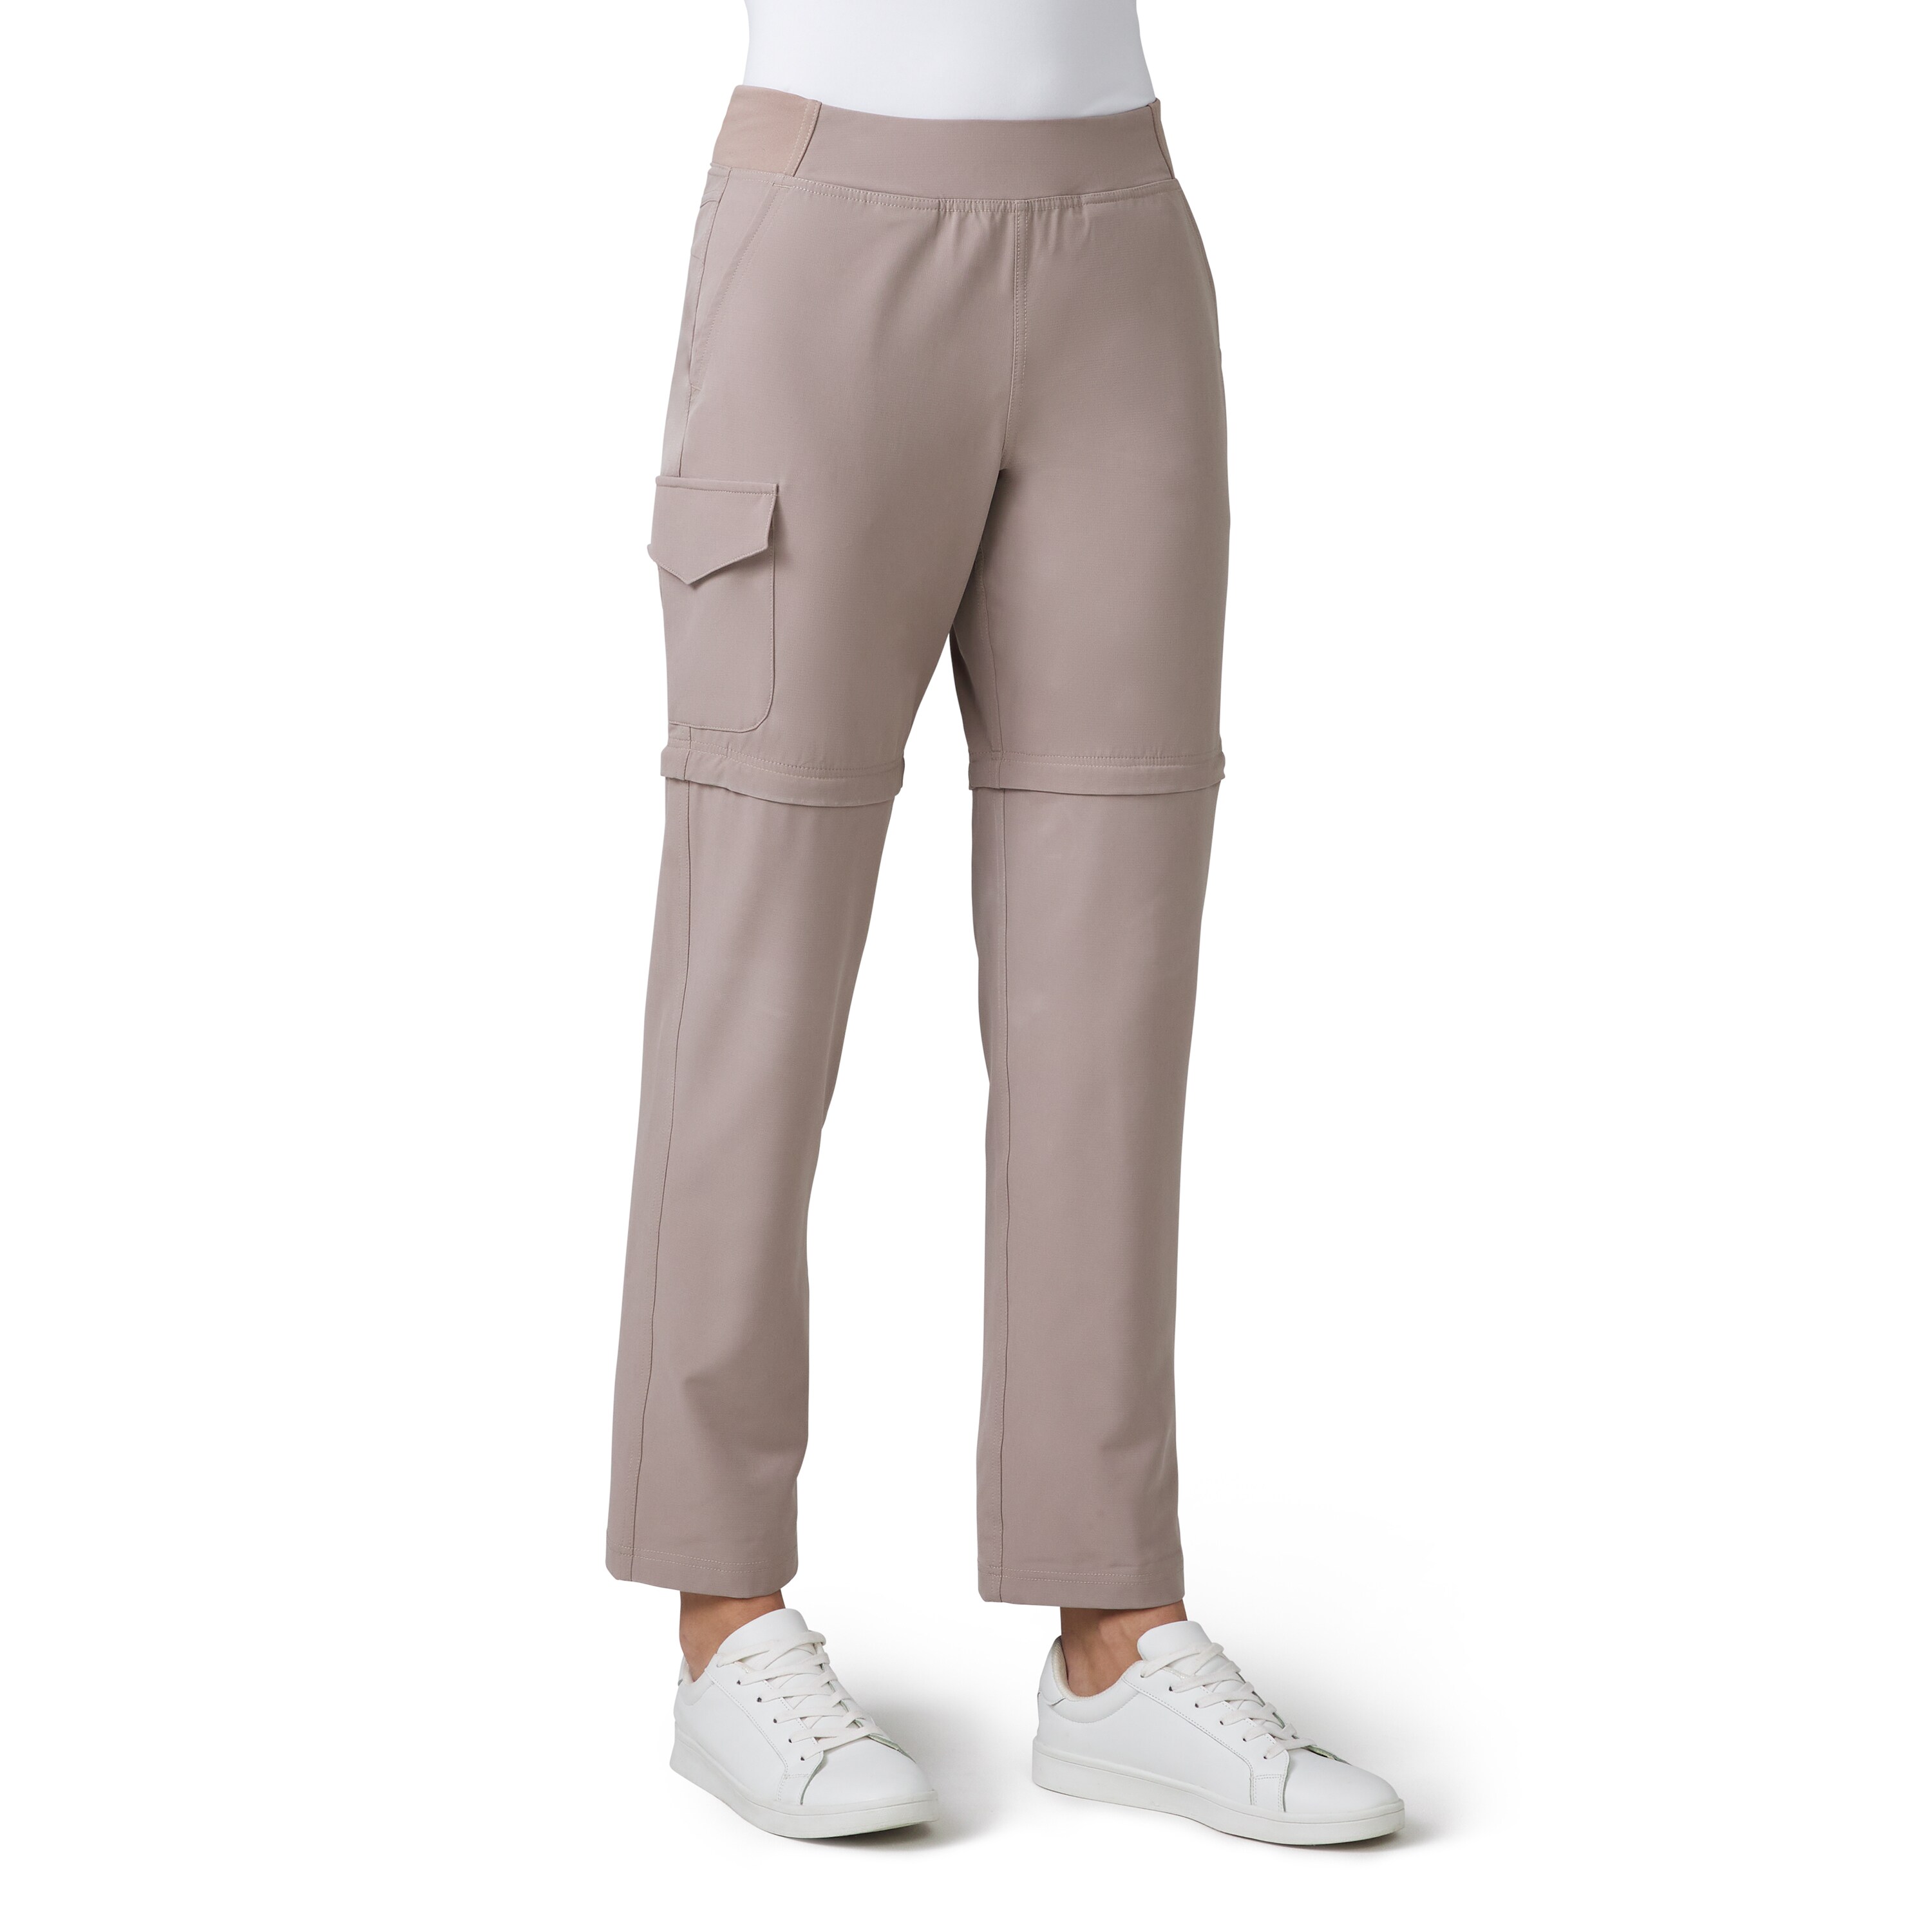 Ladies Classic Free Pants in Central Division - Clothing, James Fashions |  Jiji.ug